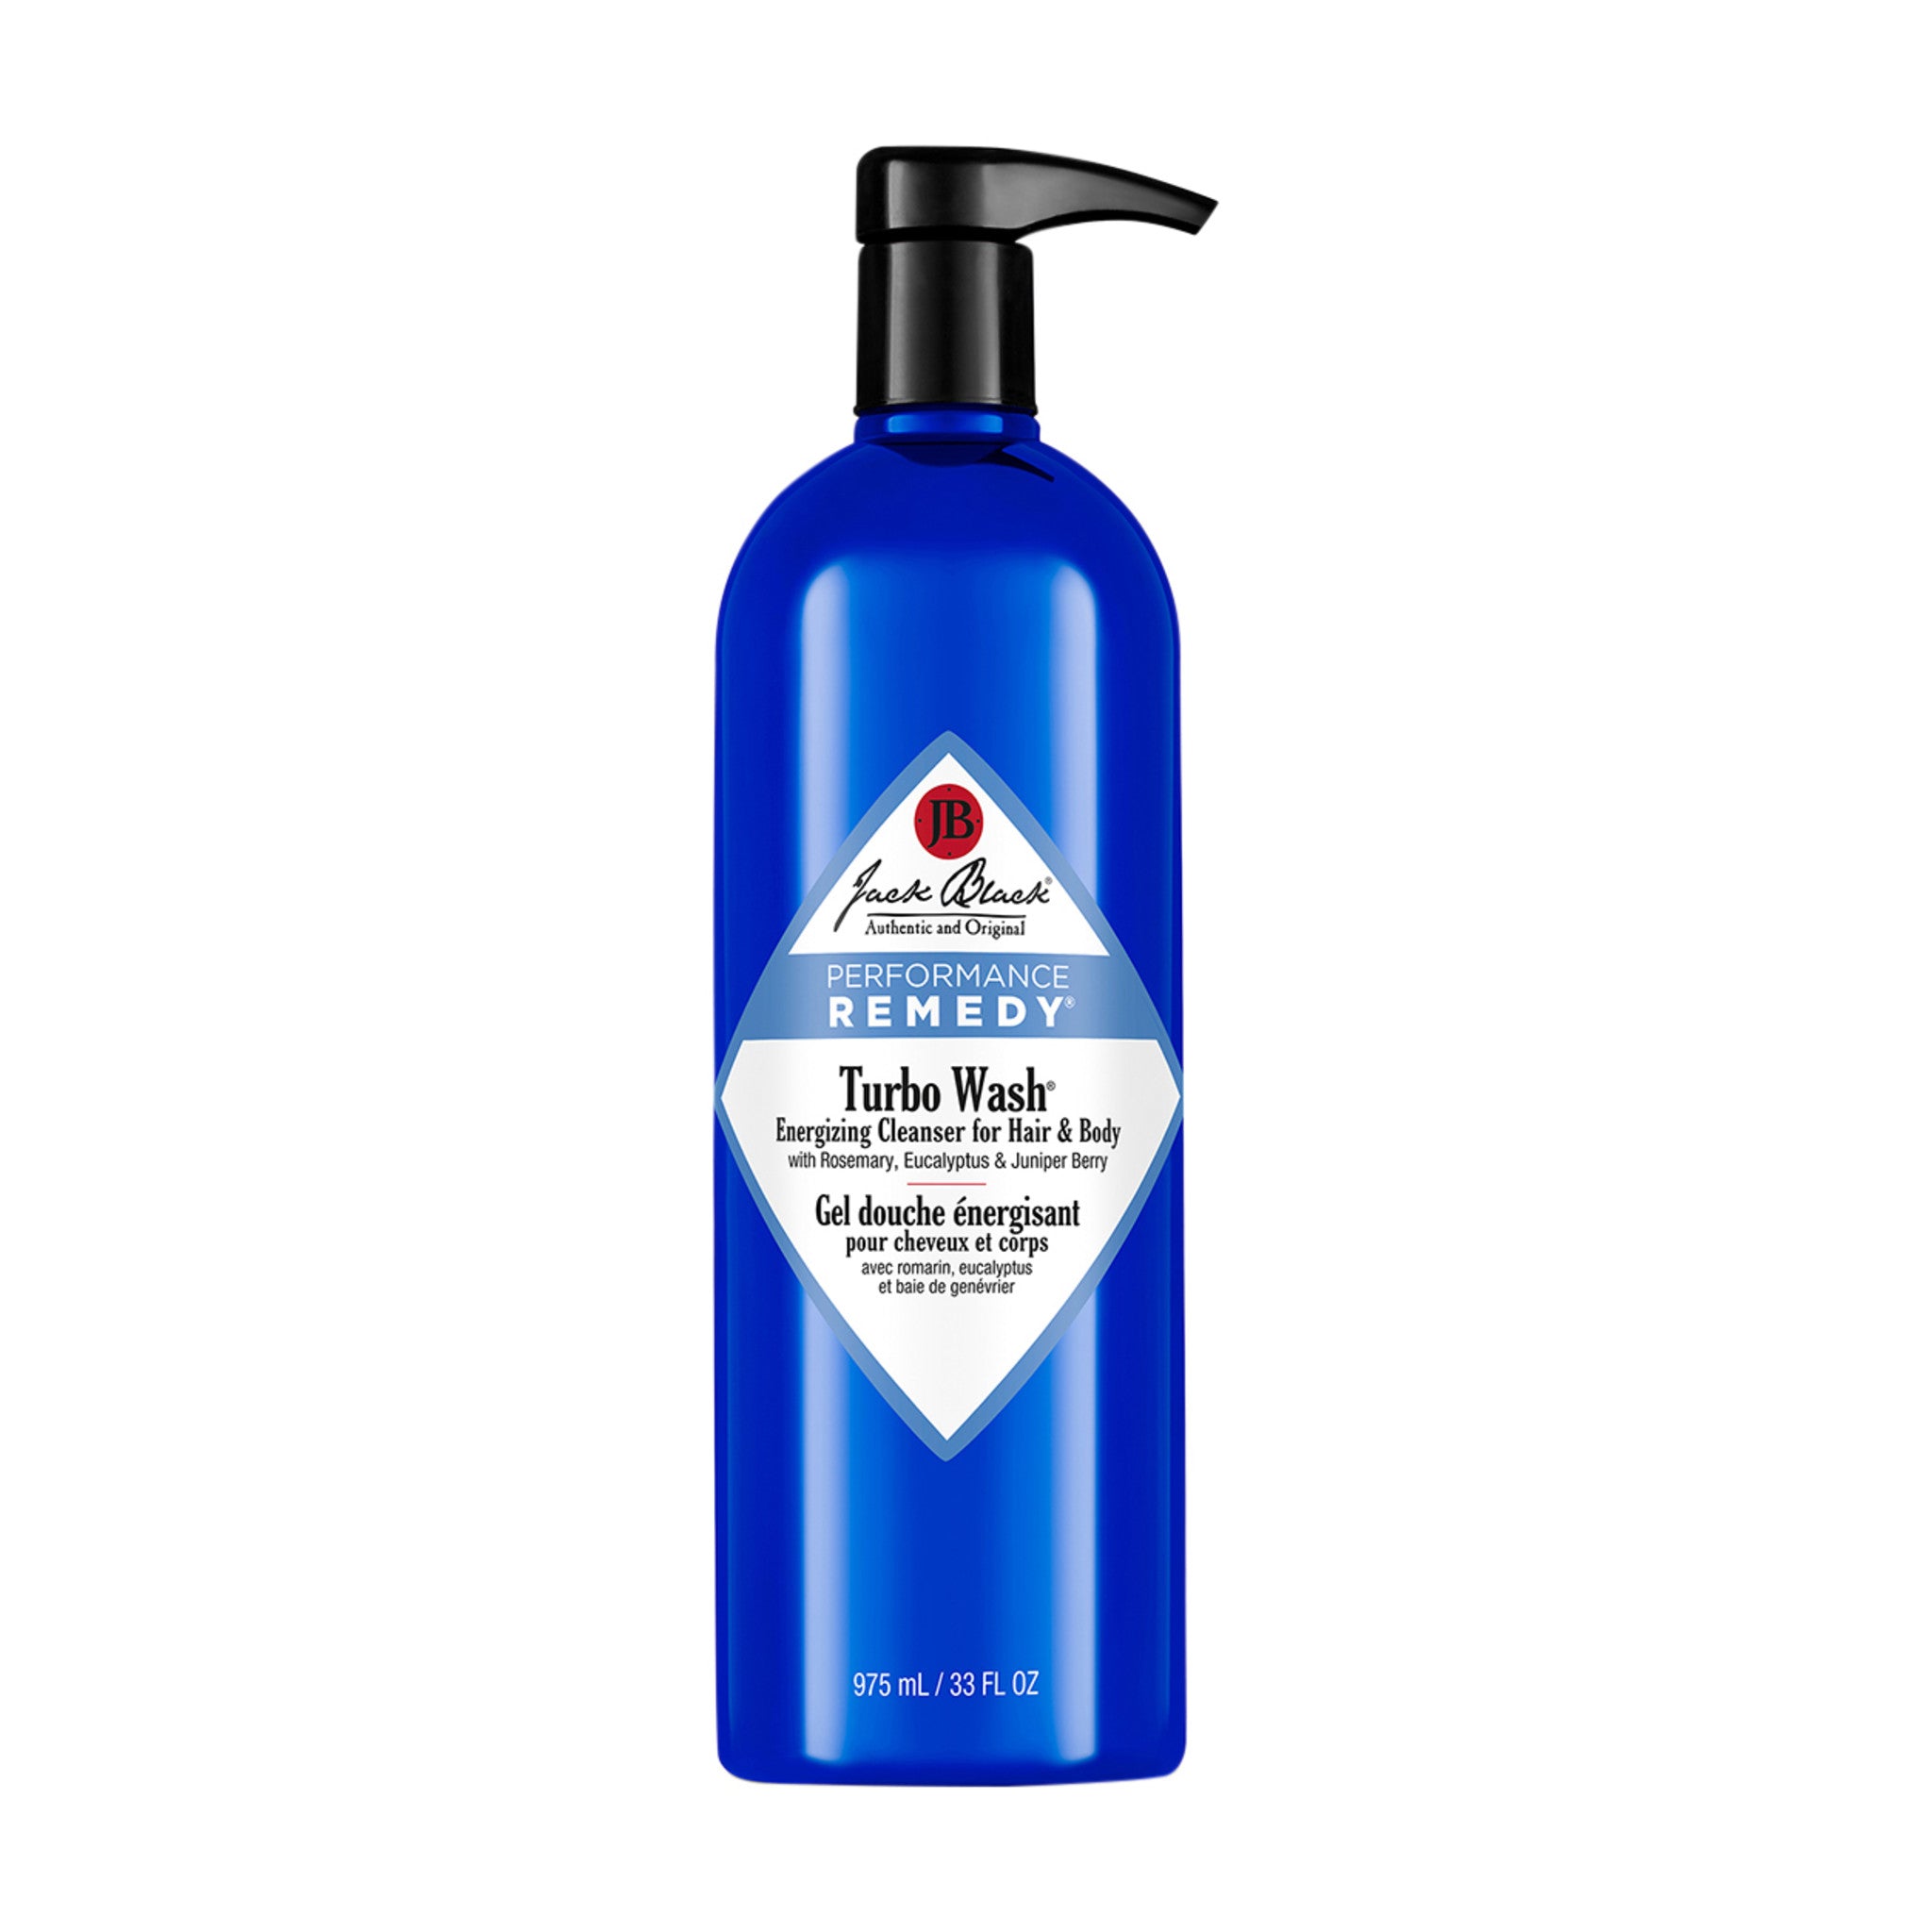 Turbo Wash Energizing Cleanser for Hair and Body main image.